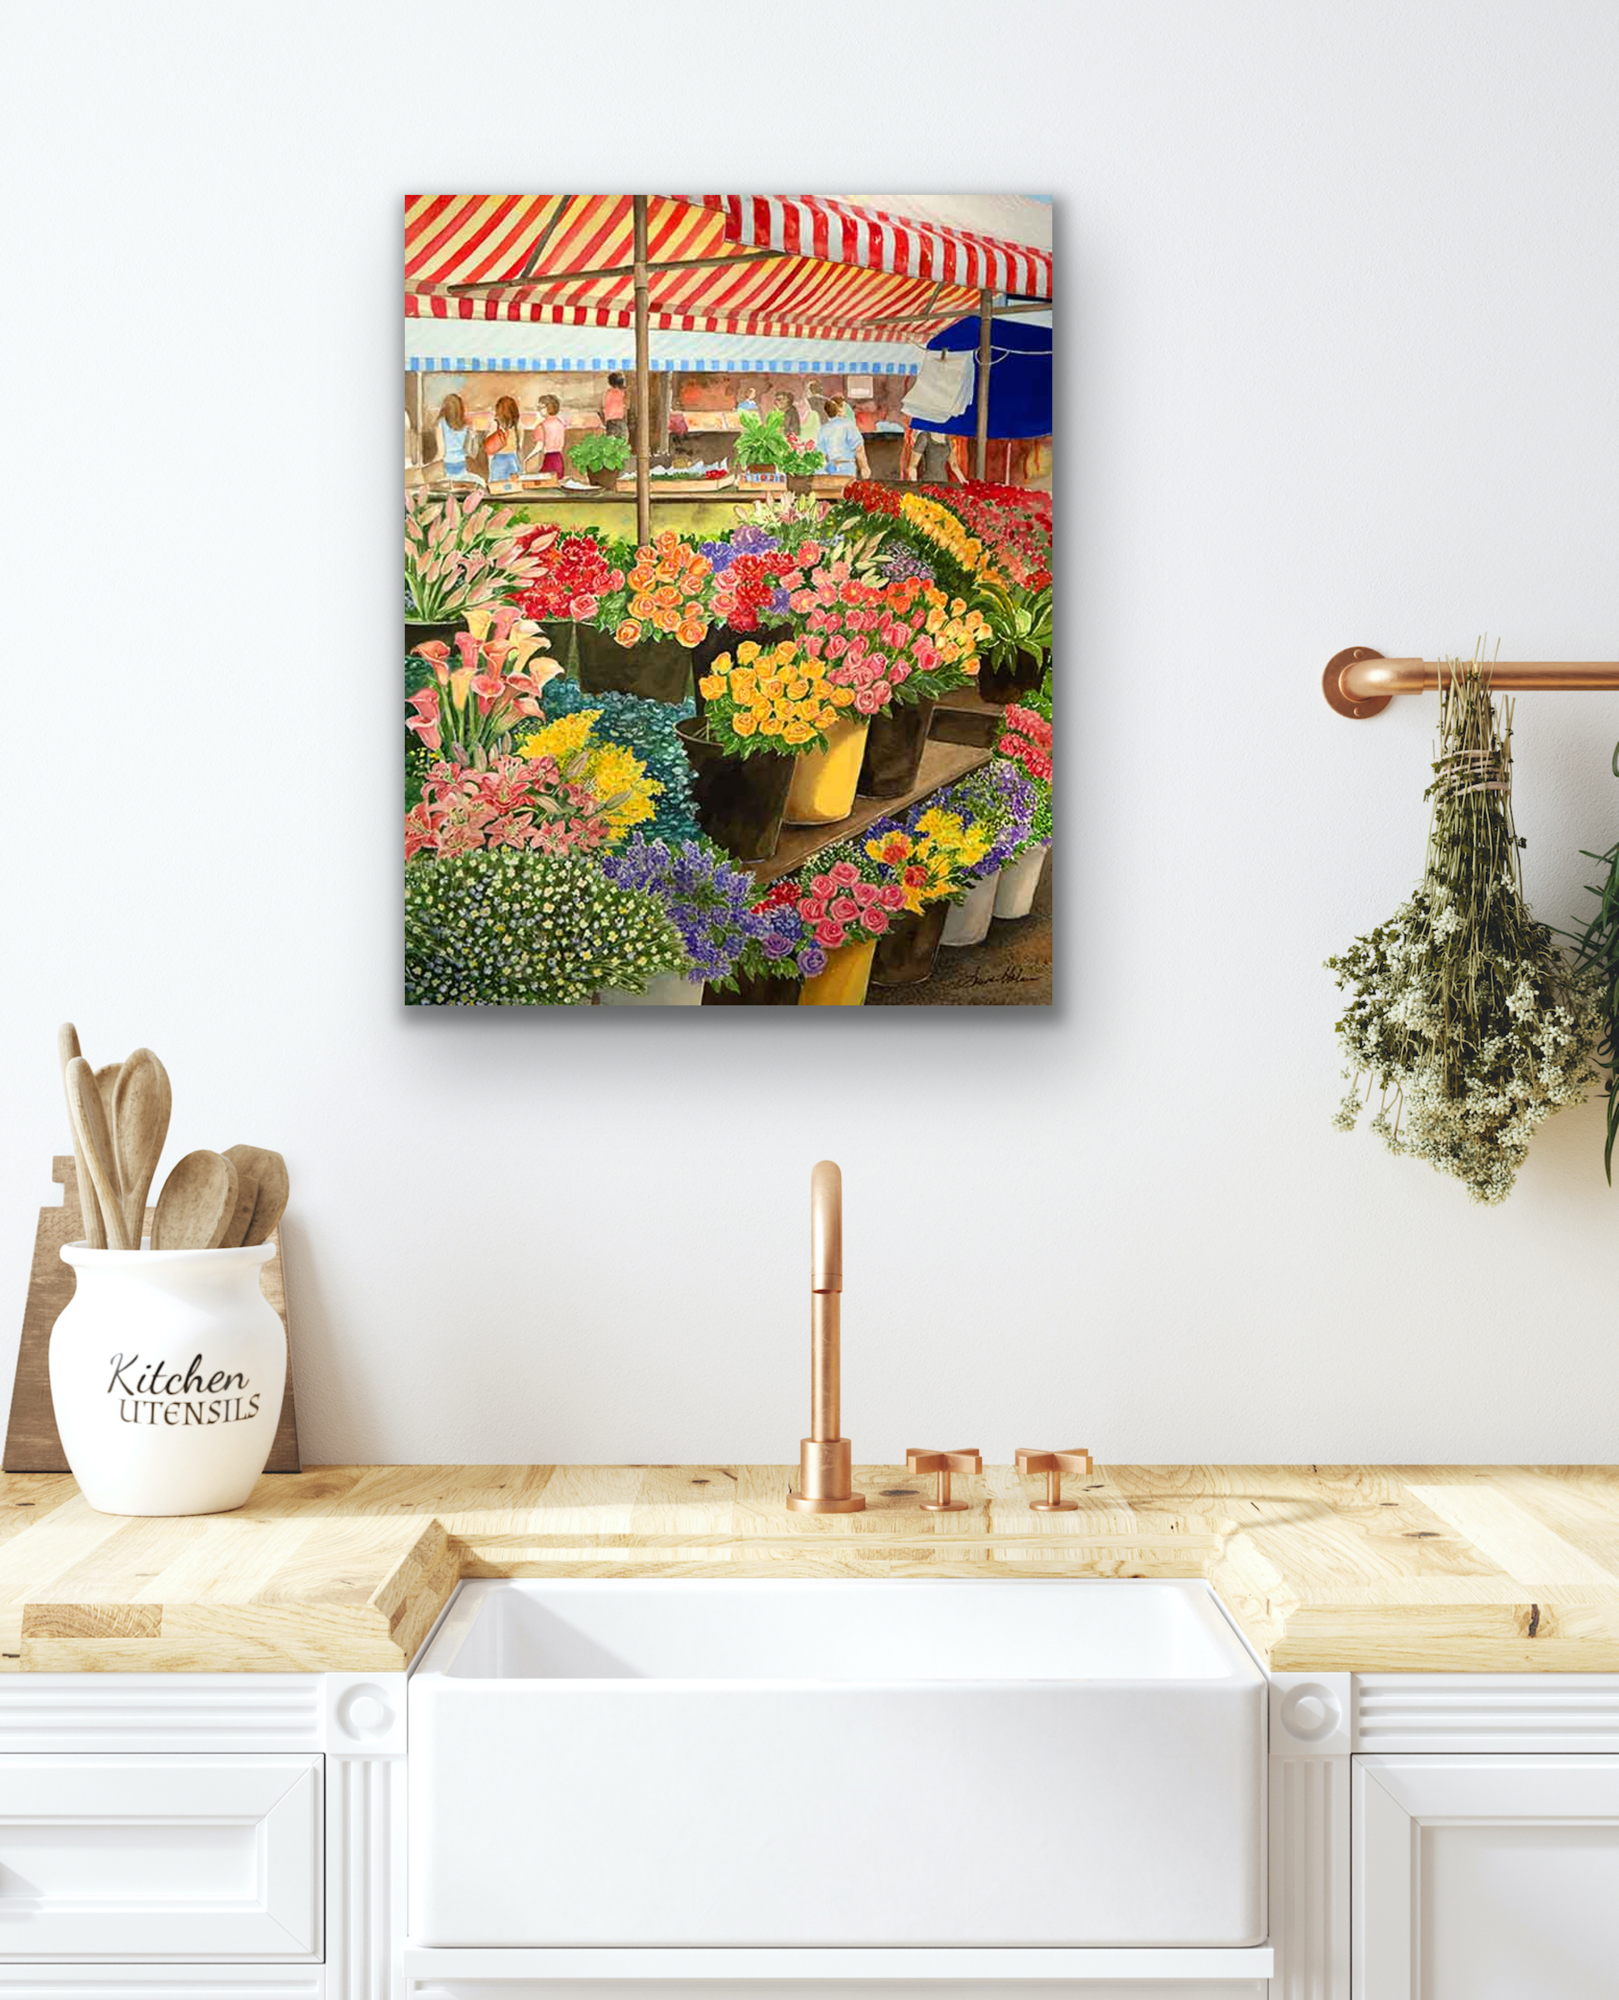 The Flower Market watercolor print will look good in your kitchen, bathroom or any room in your own.